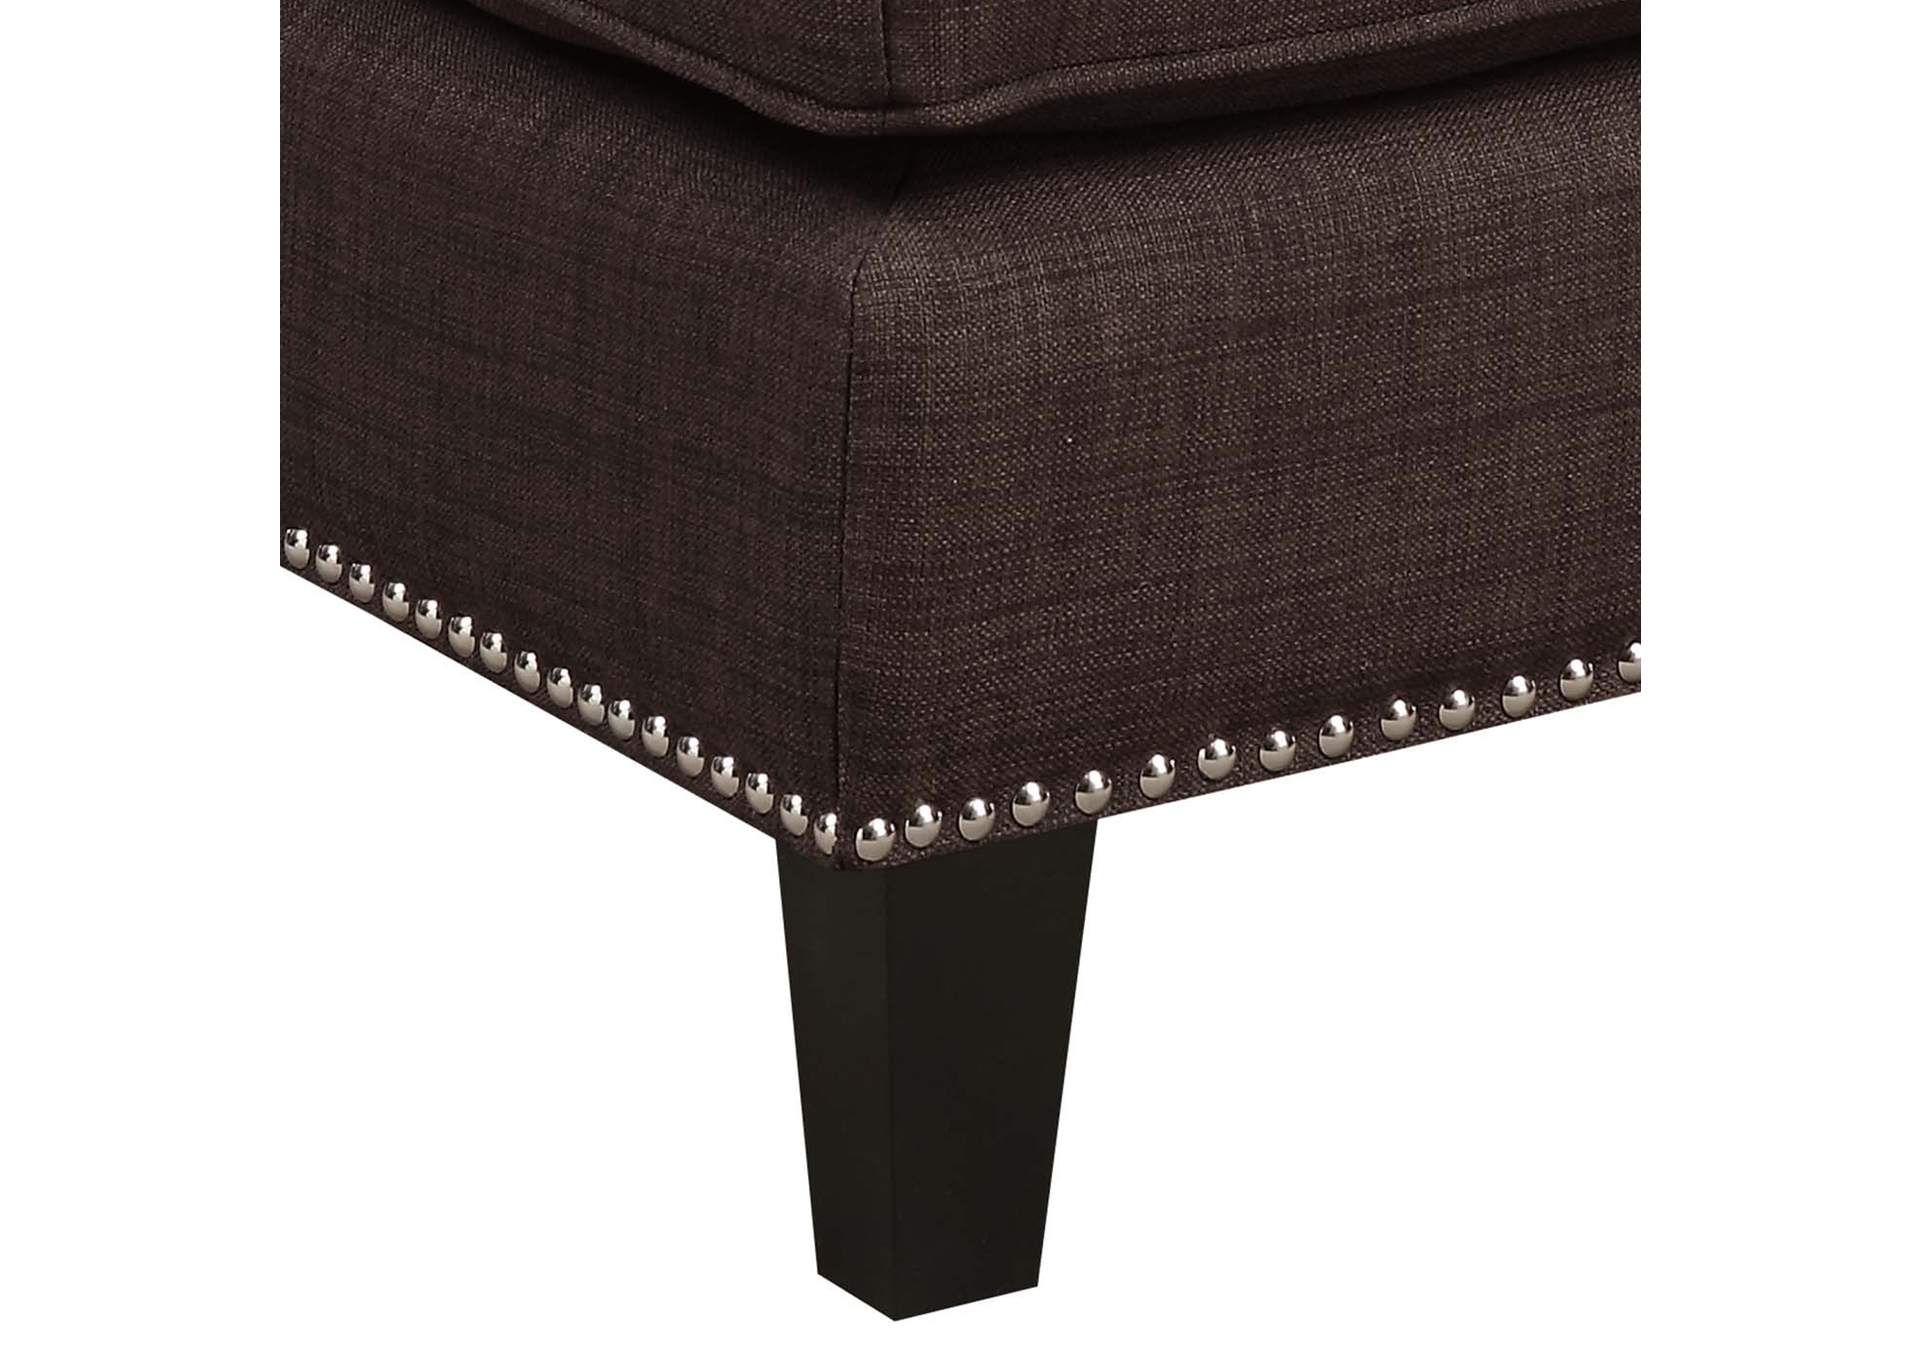 Erica 497 Ottoman With Chrome Nail Heirloom Chocolate,Elements